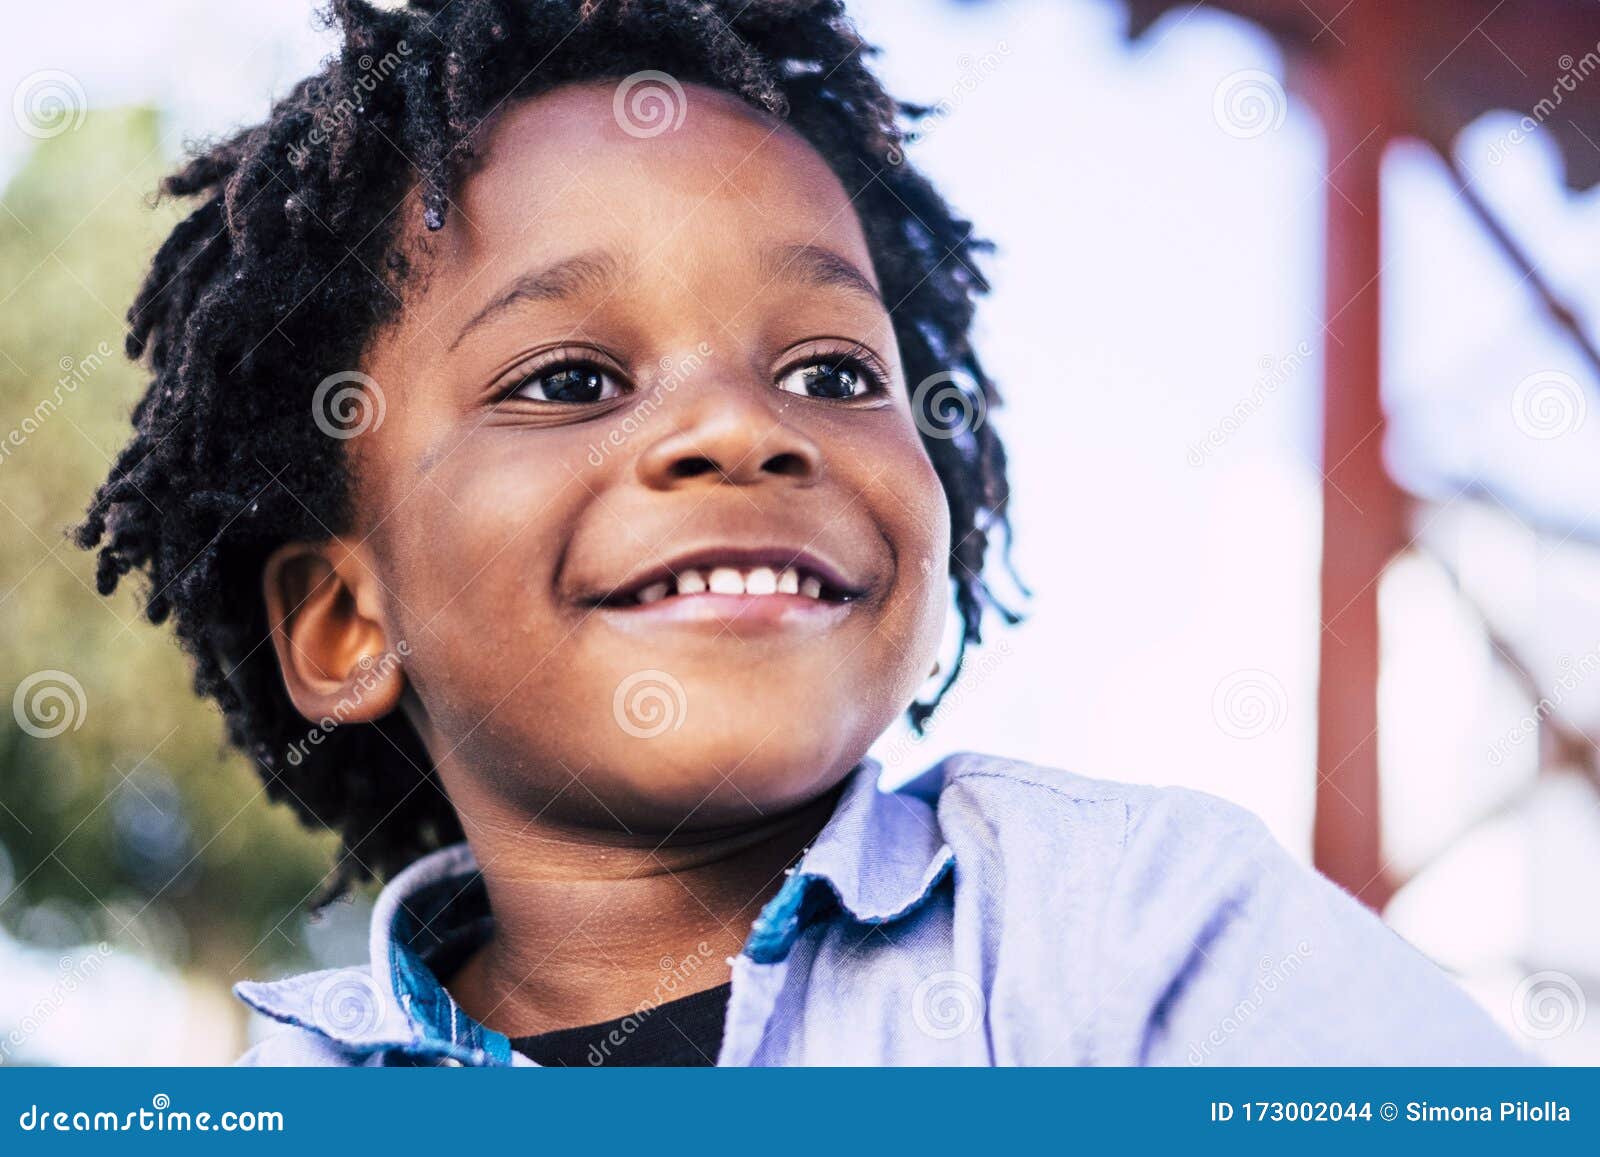 Big Real Smile from Young Happy Black Afro Boy - Playful Kids Have Fun -  Joyful African Boy Concept - Dreadlocks Children Smile Stock Photo - Image  of culture, mixed: 173002044